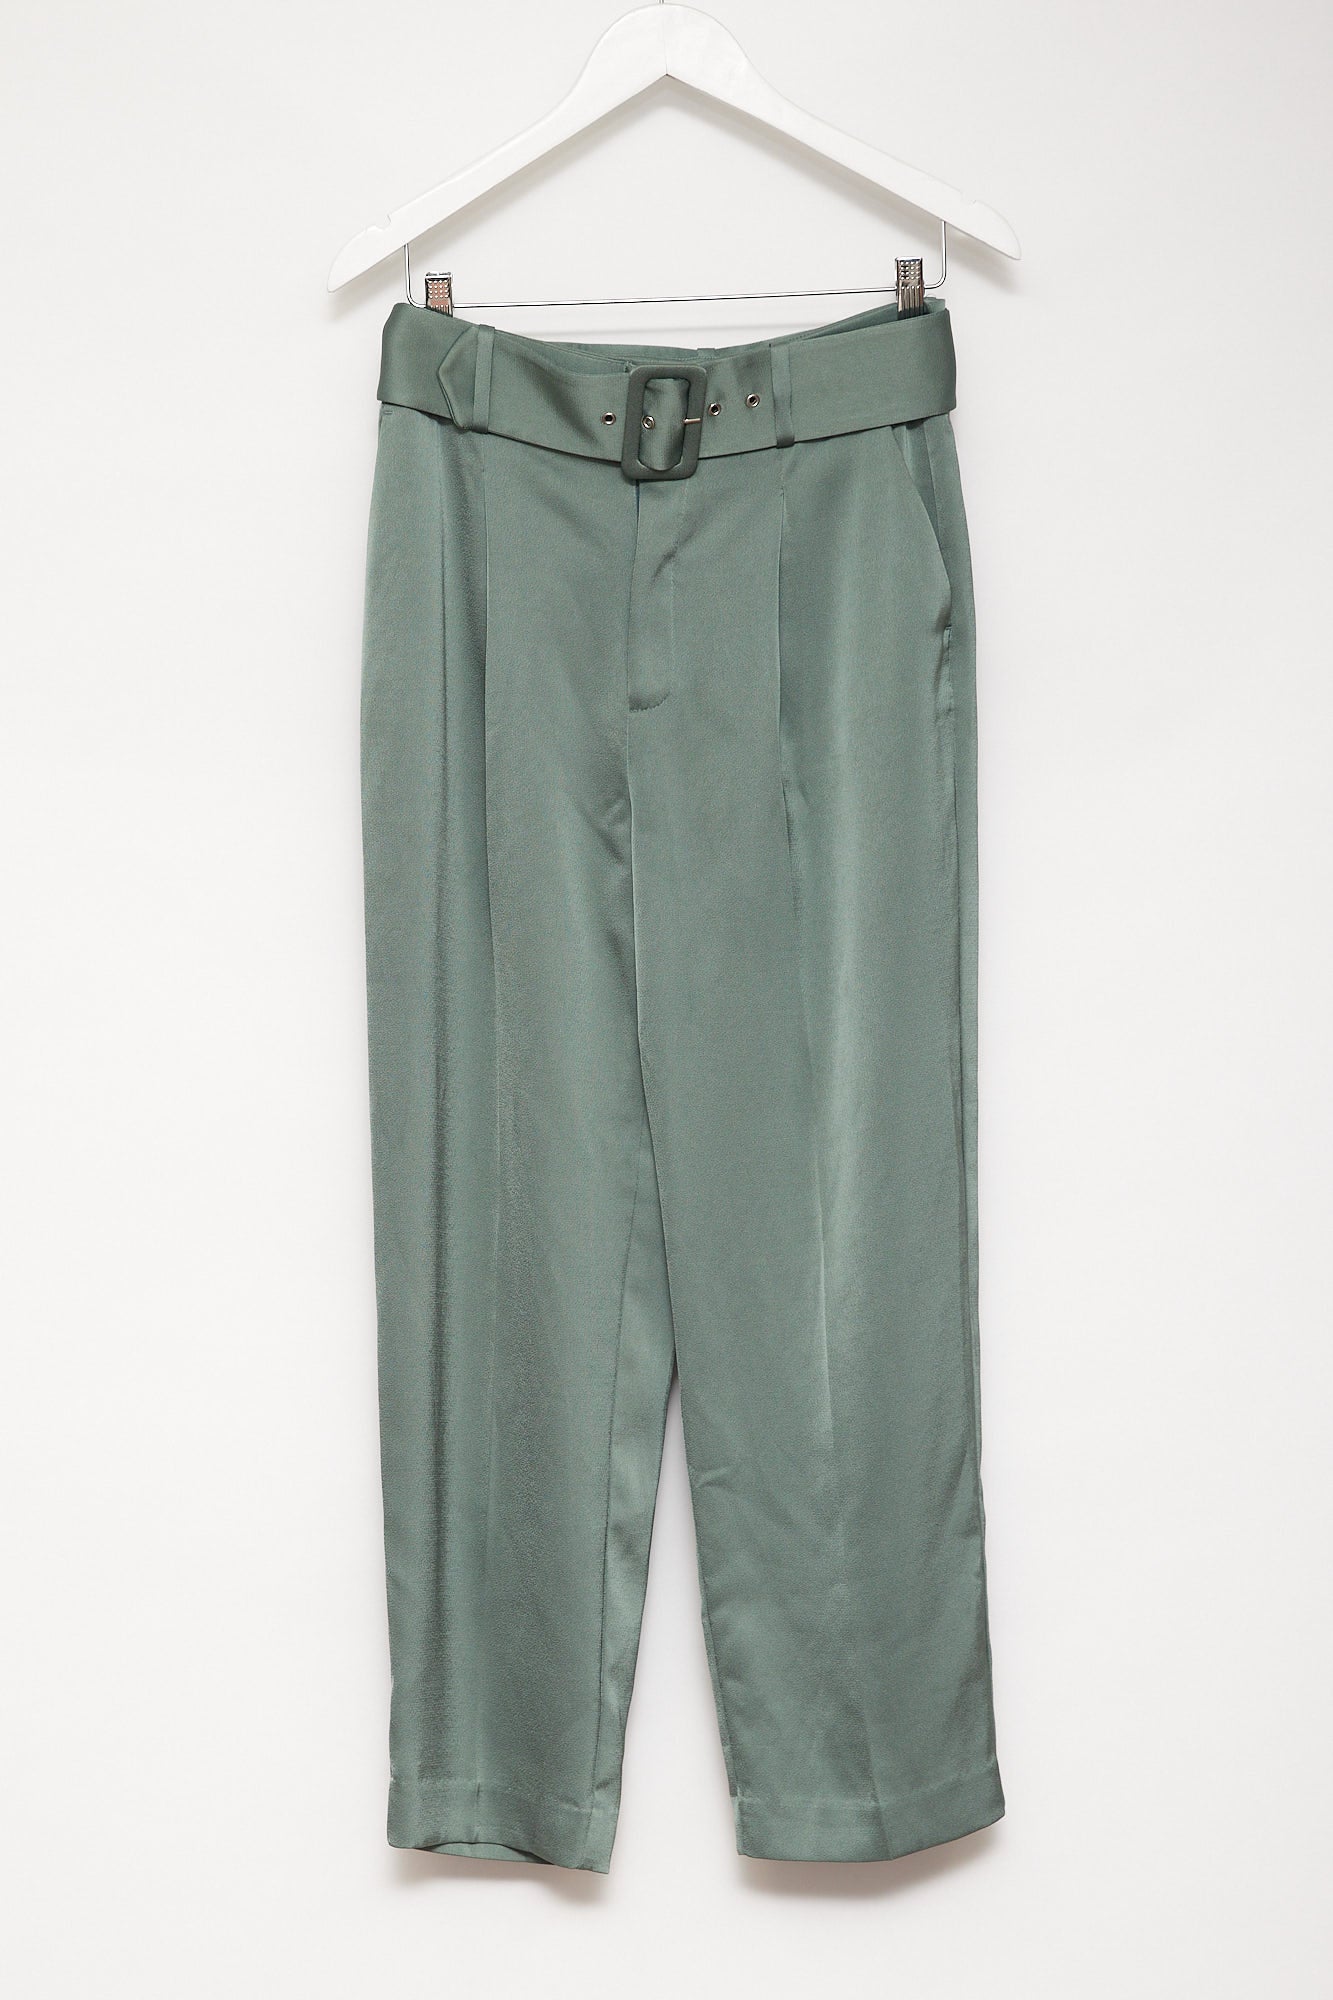 Womens Green satin trouser with belt size small